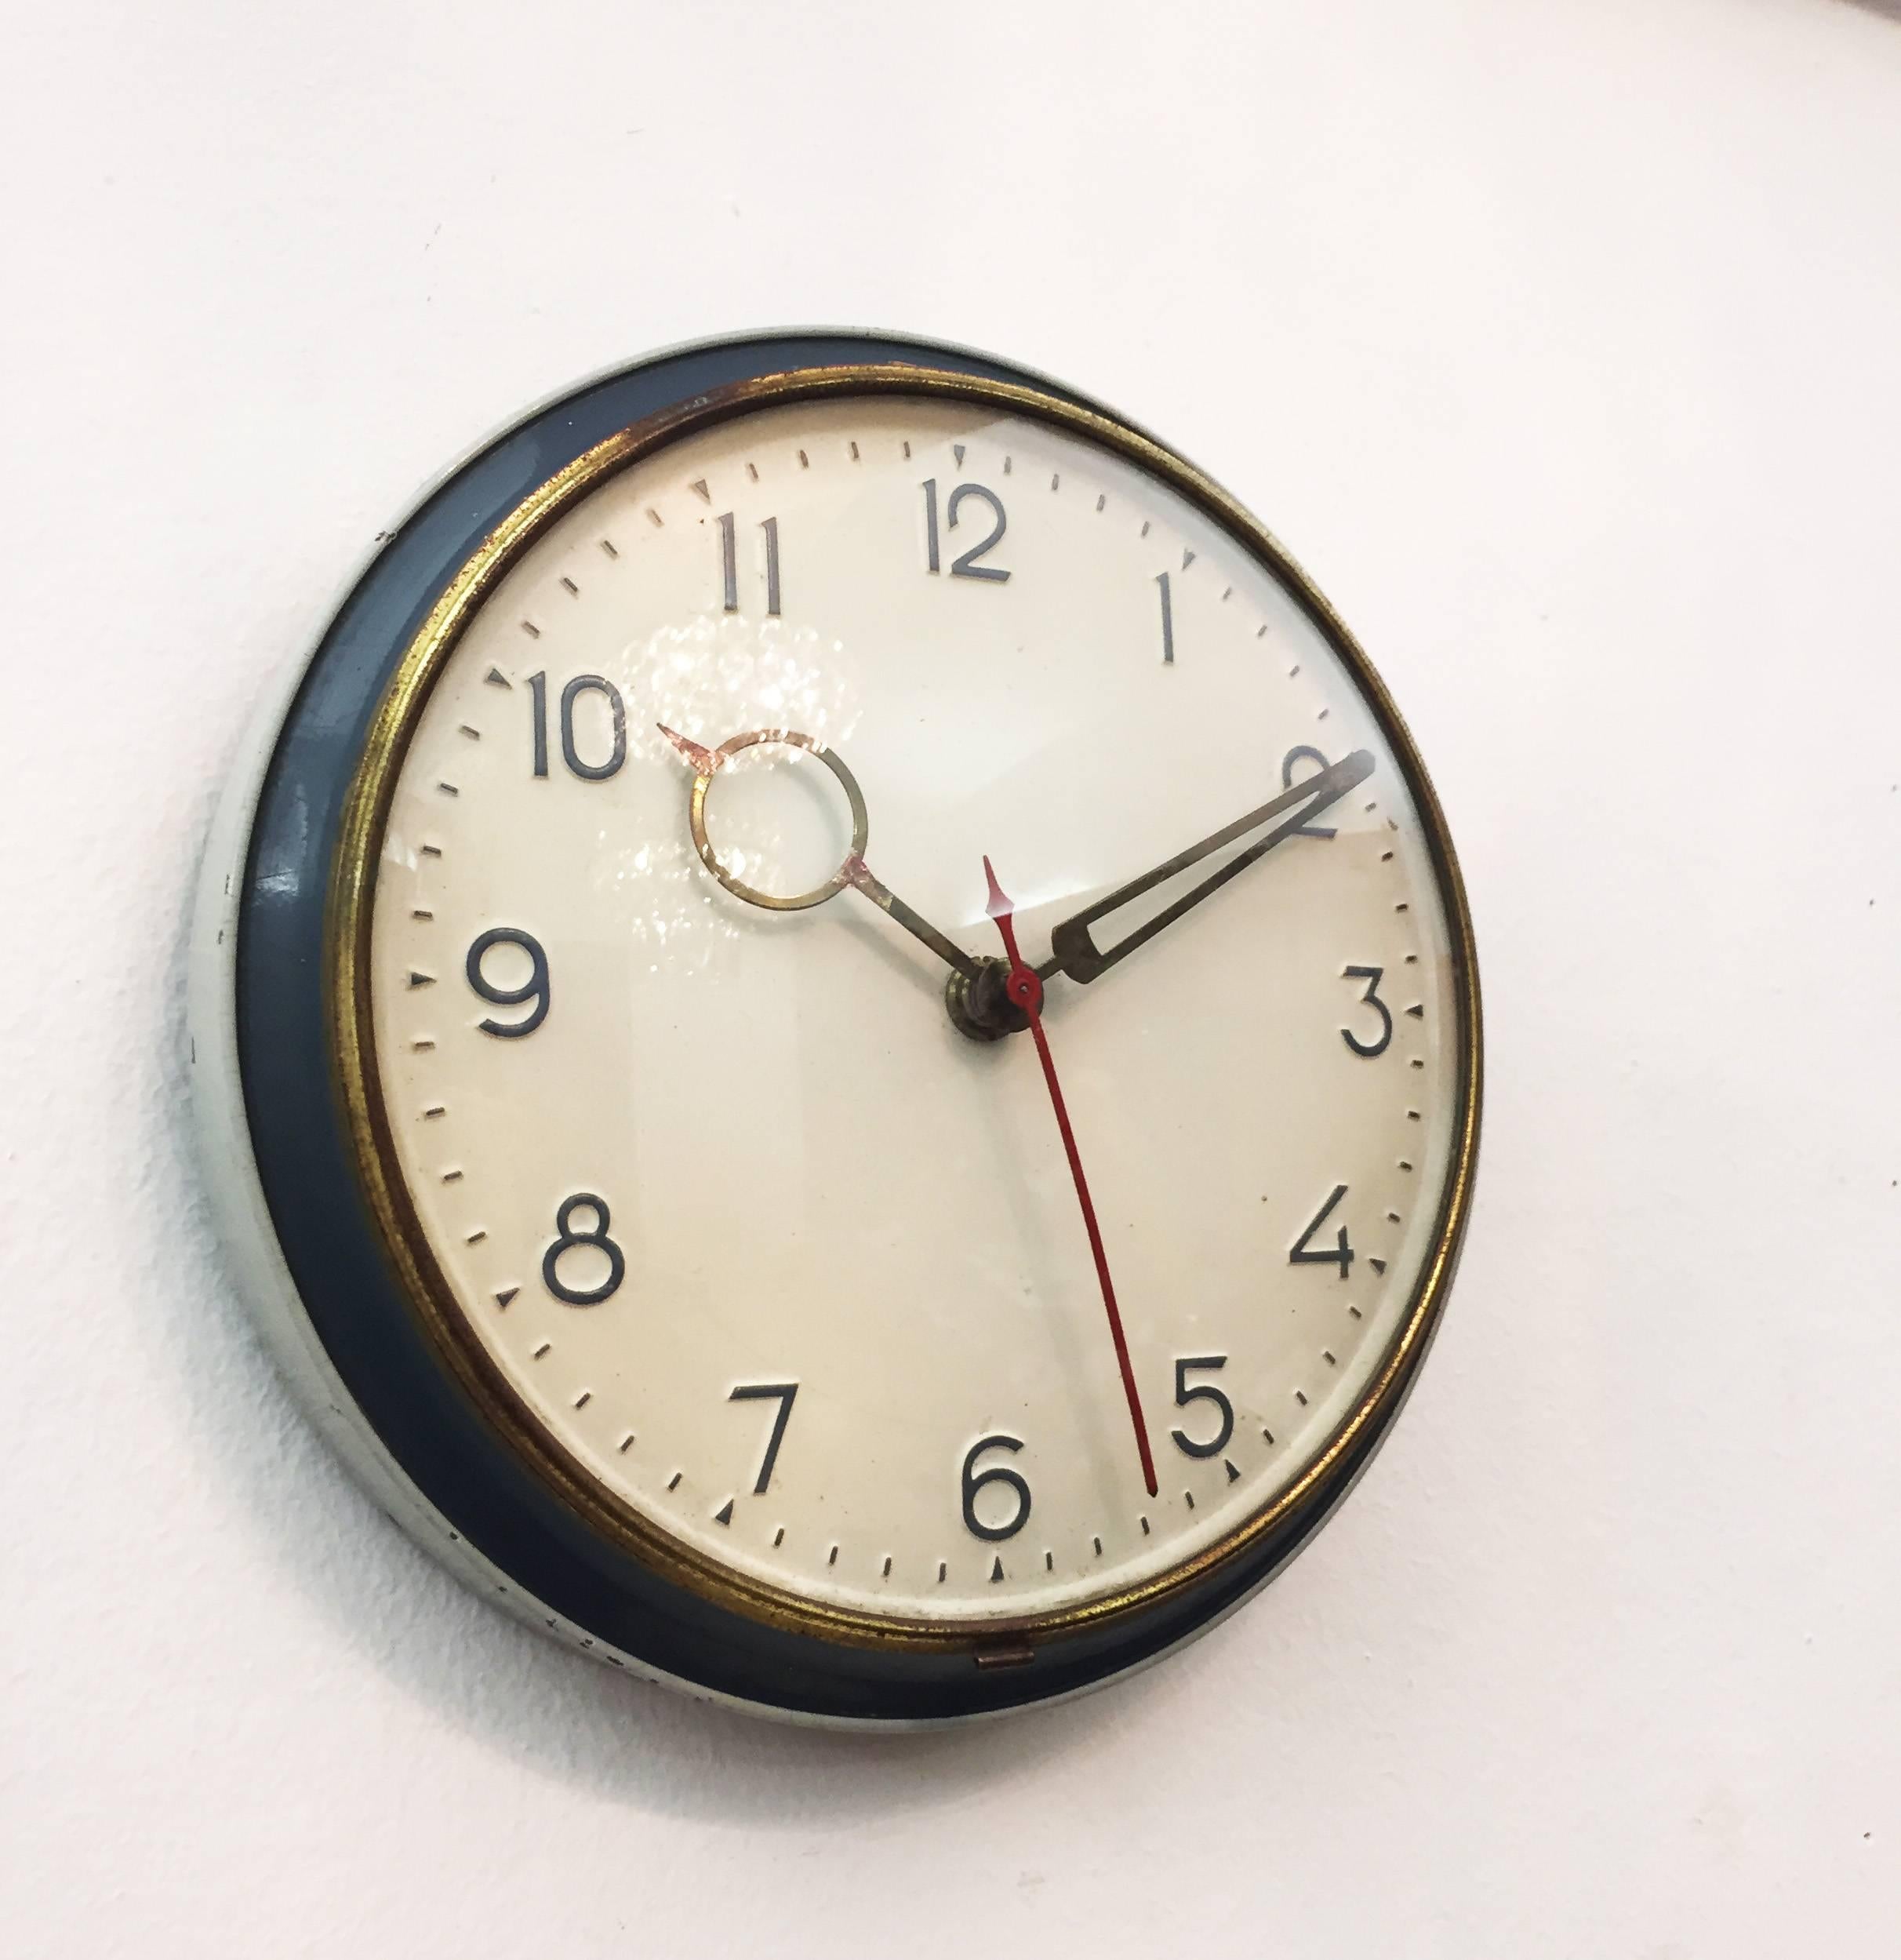 Industrial Factory or Workshop Wall Clock Attributed to Kienzle